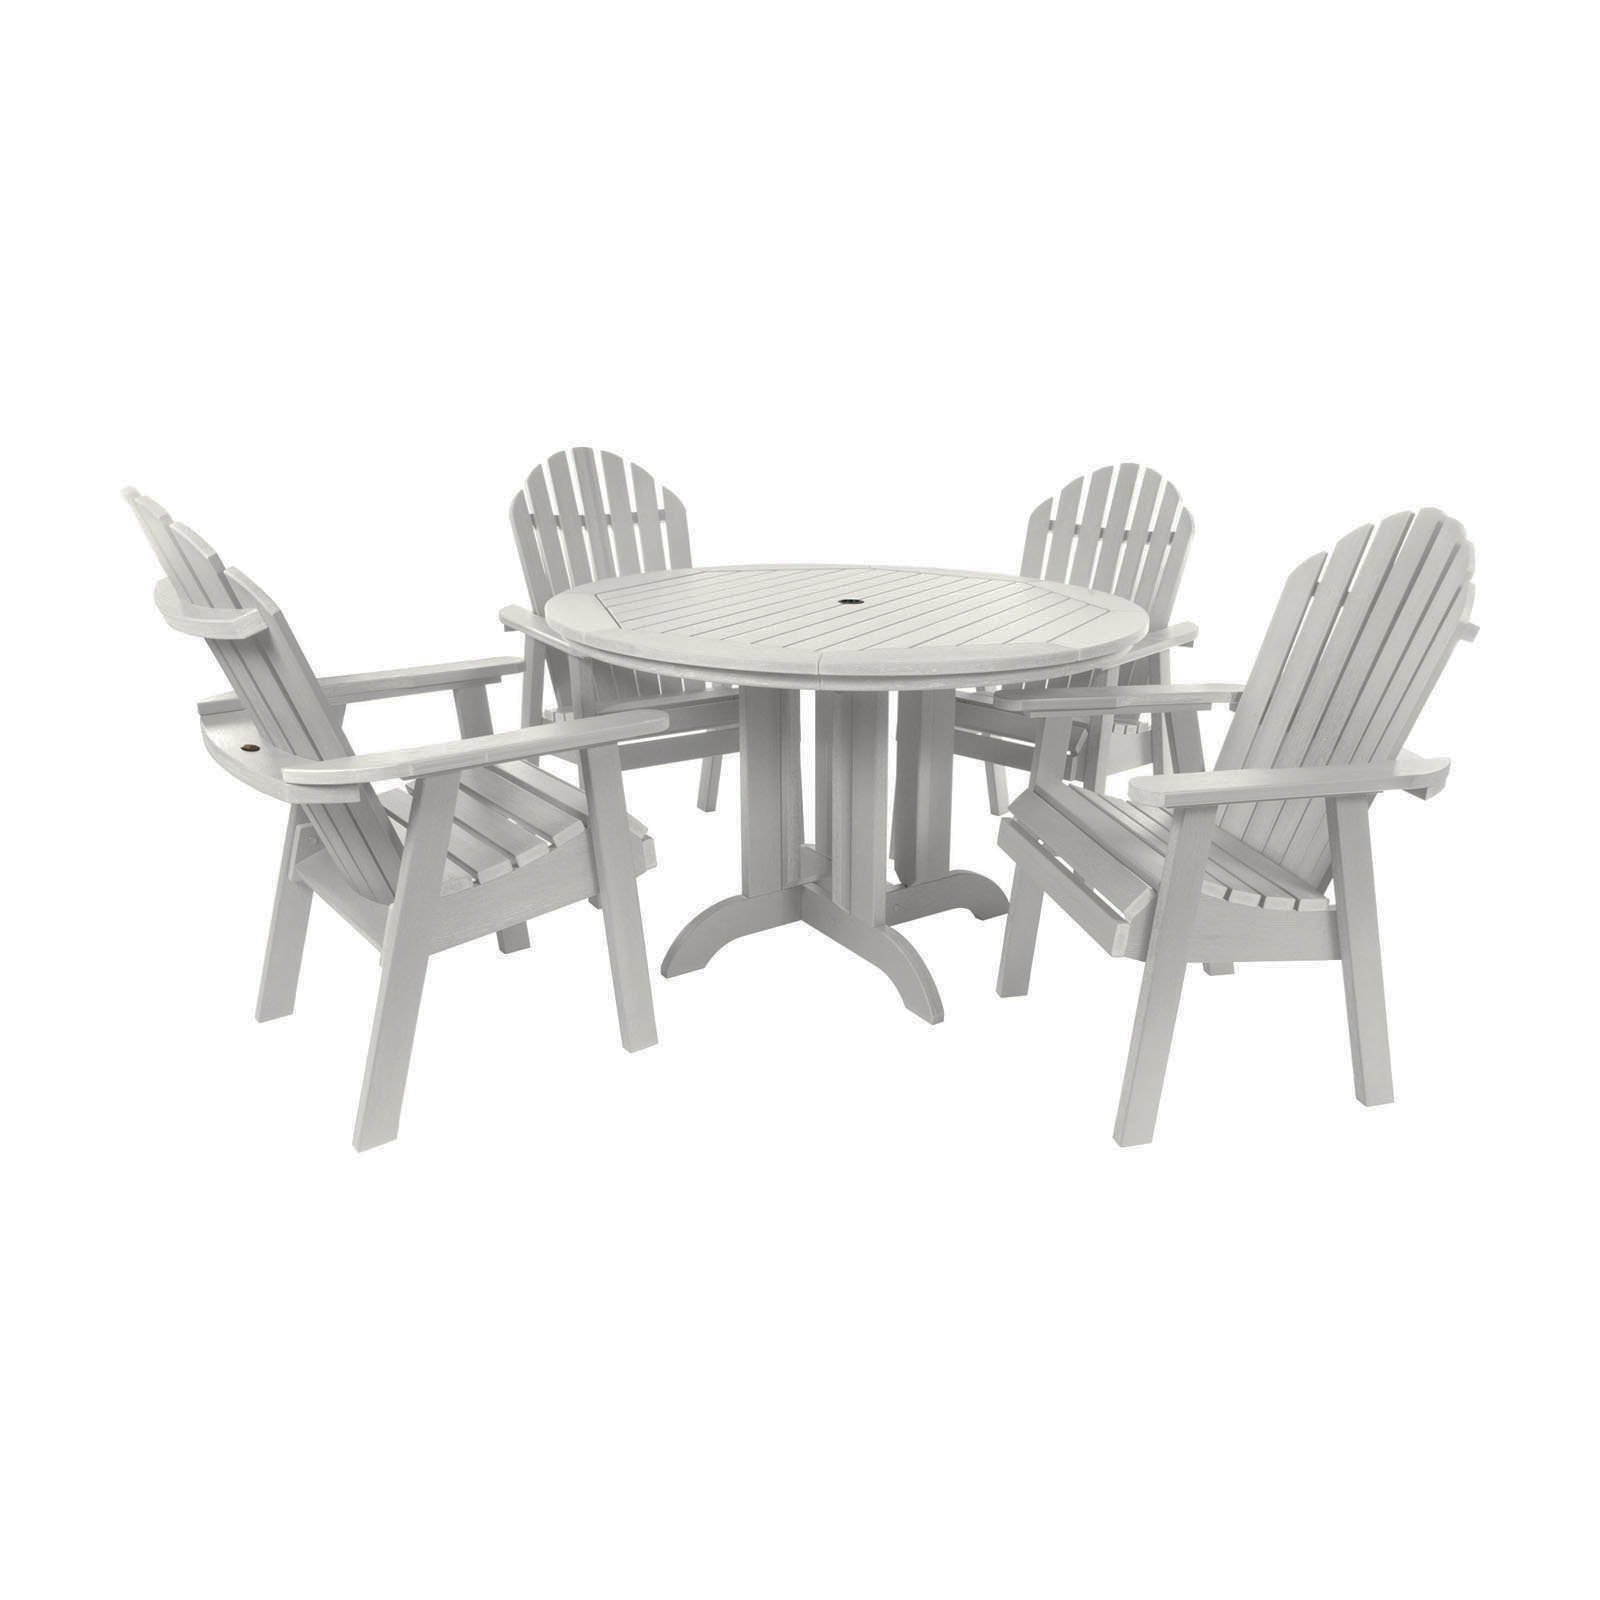 The Sequoia Professional Commercial Grade 5 Pc Muskoka Adirondack Dining Set with 48” Table - image 1 of 2